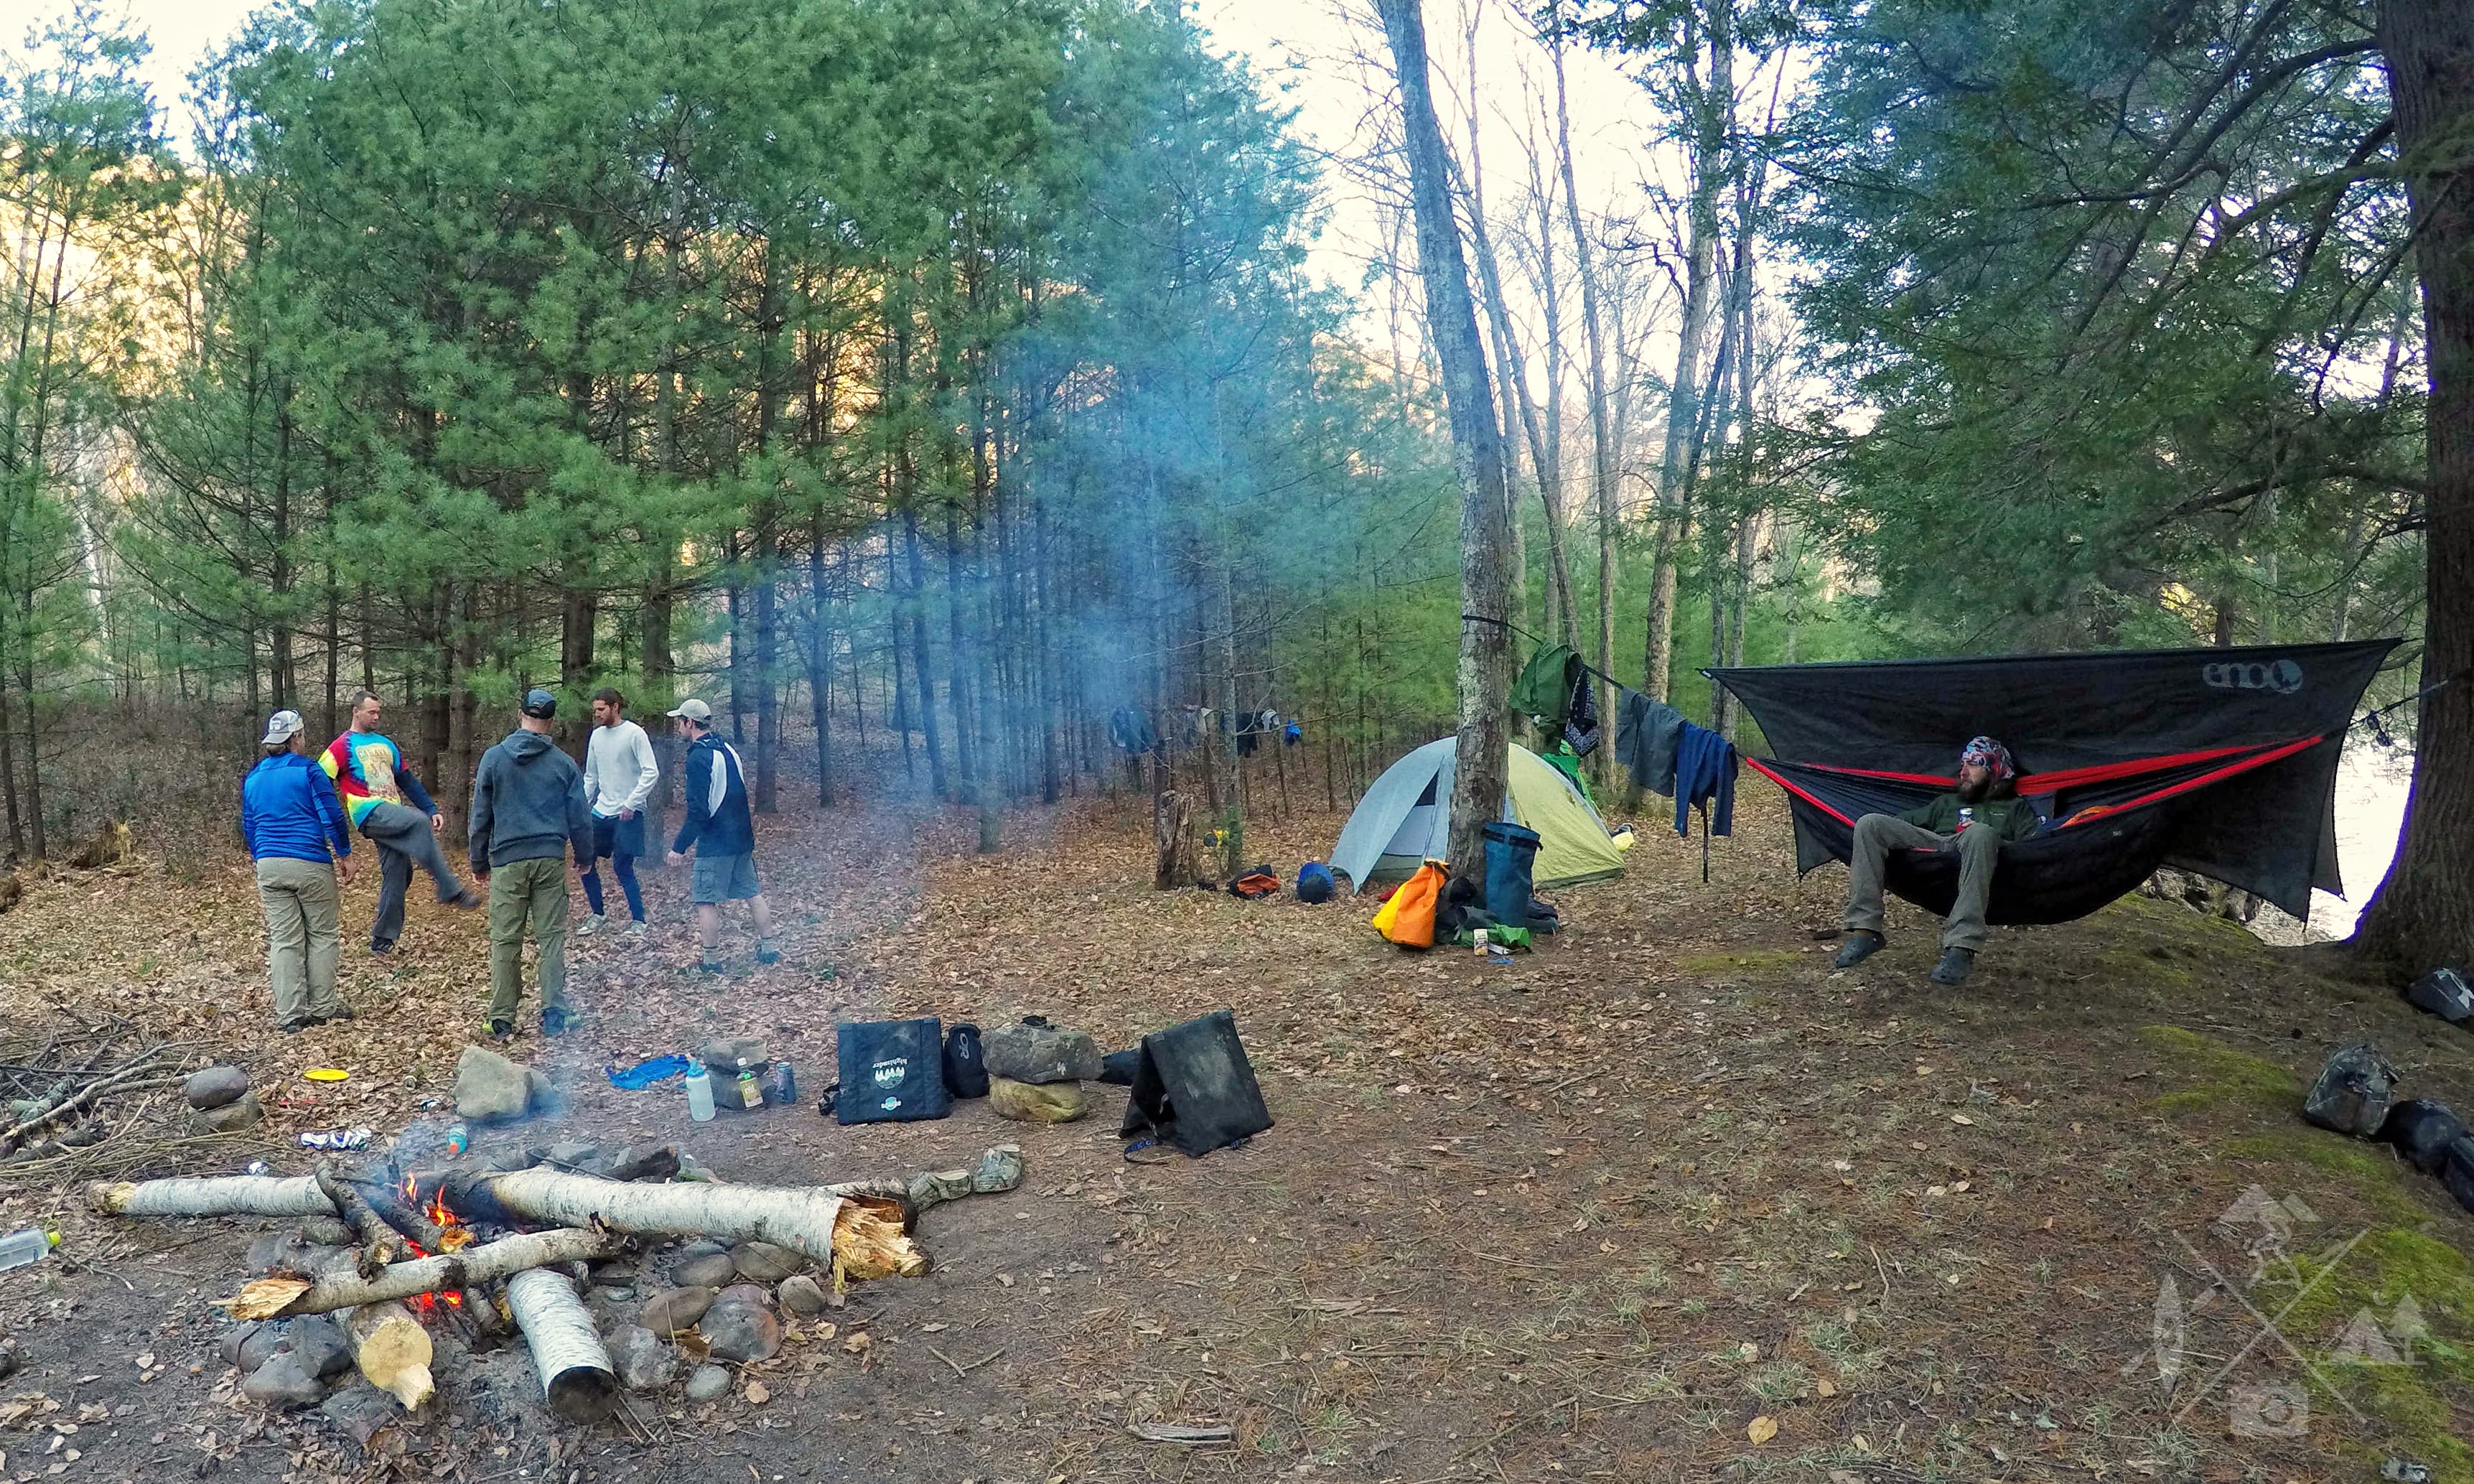 The state parks are great, but paddle Pine Creek and there are some great primitive campsites!